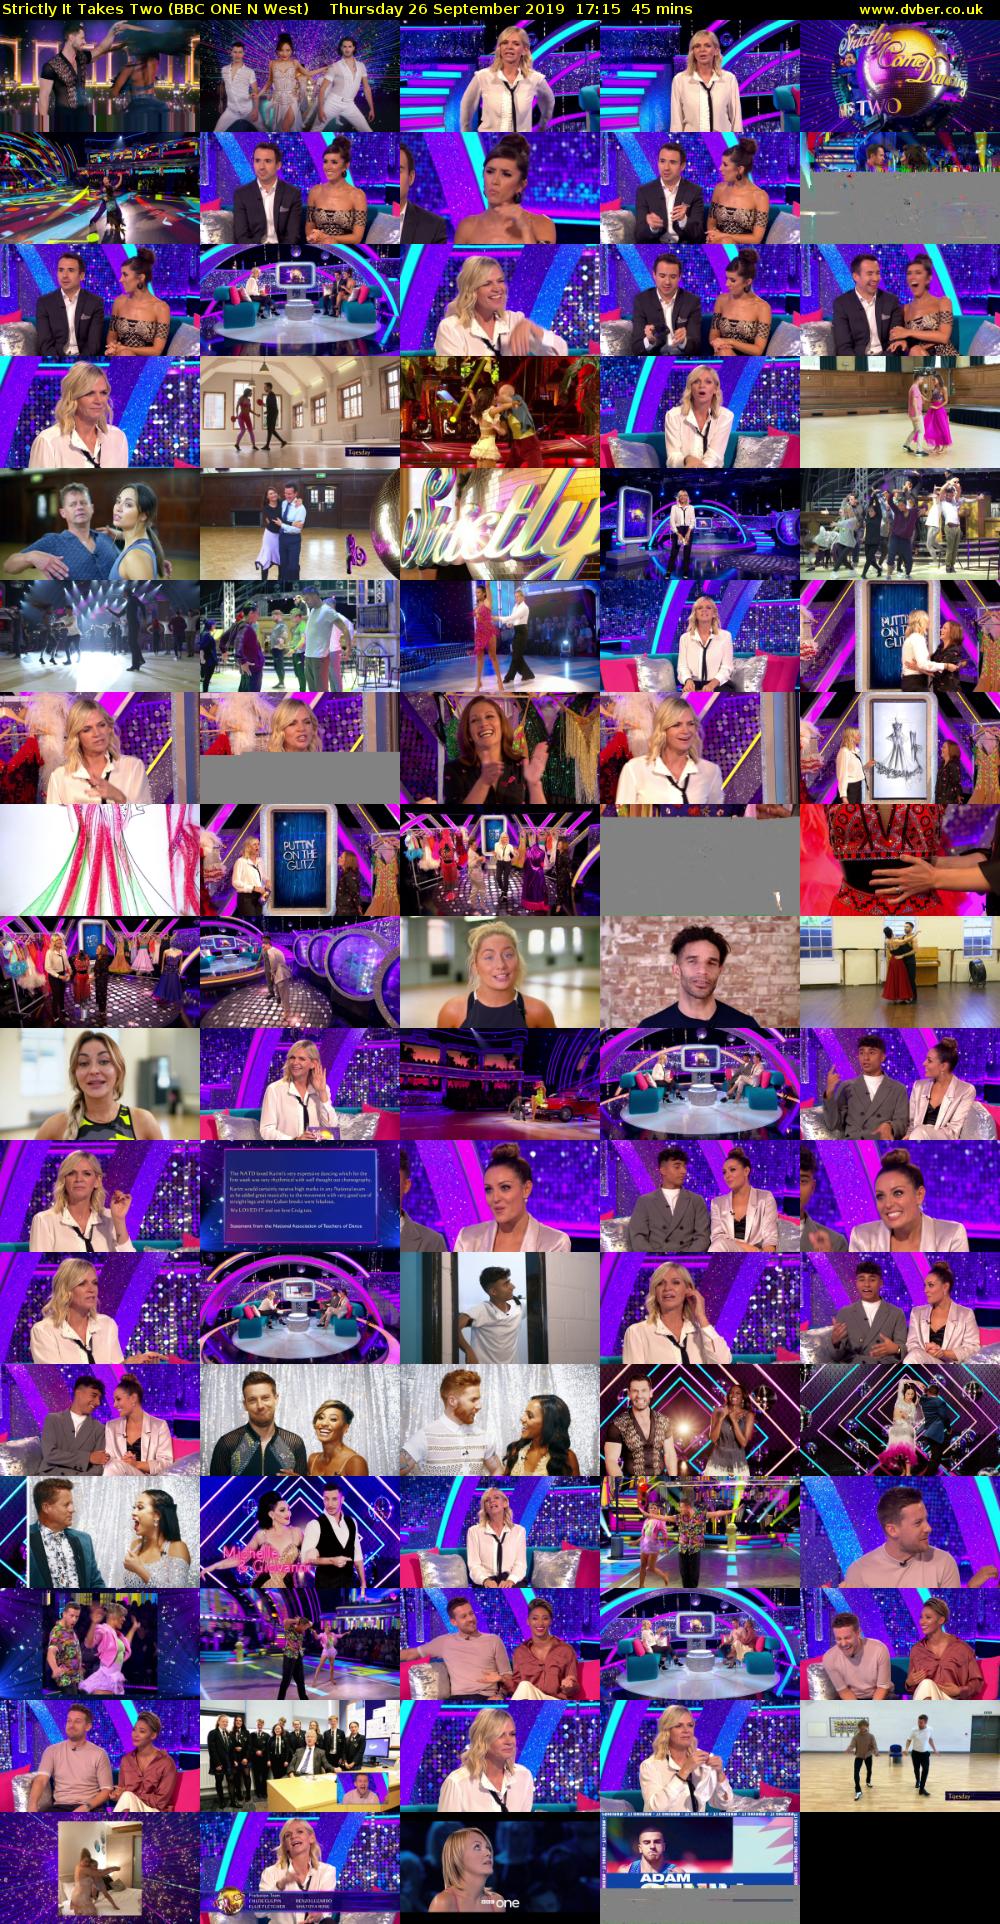 Strictly It Takes Two (BBC ONE N West) Thursday 26 September 2019 17:15 - 18:00